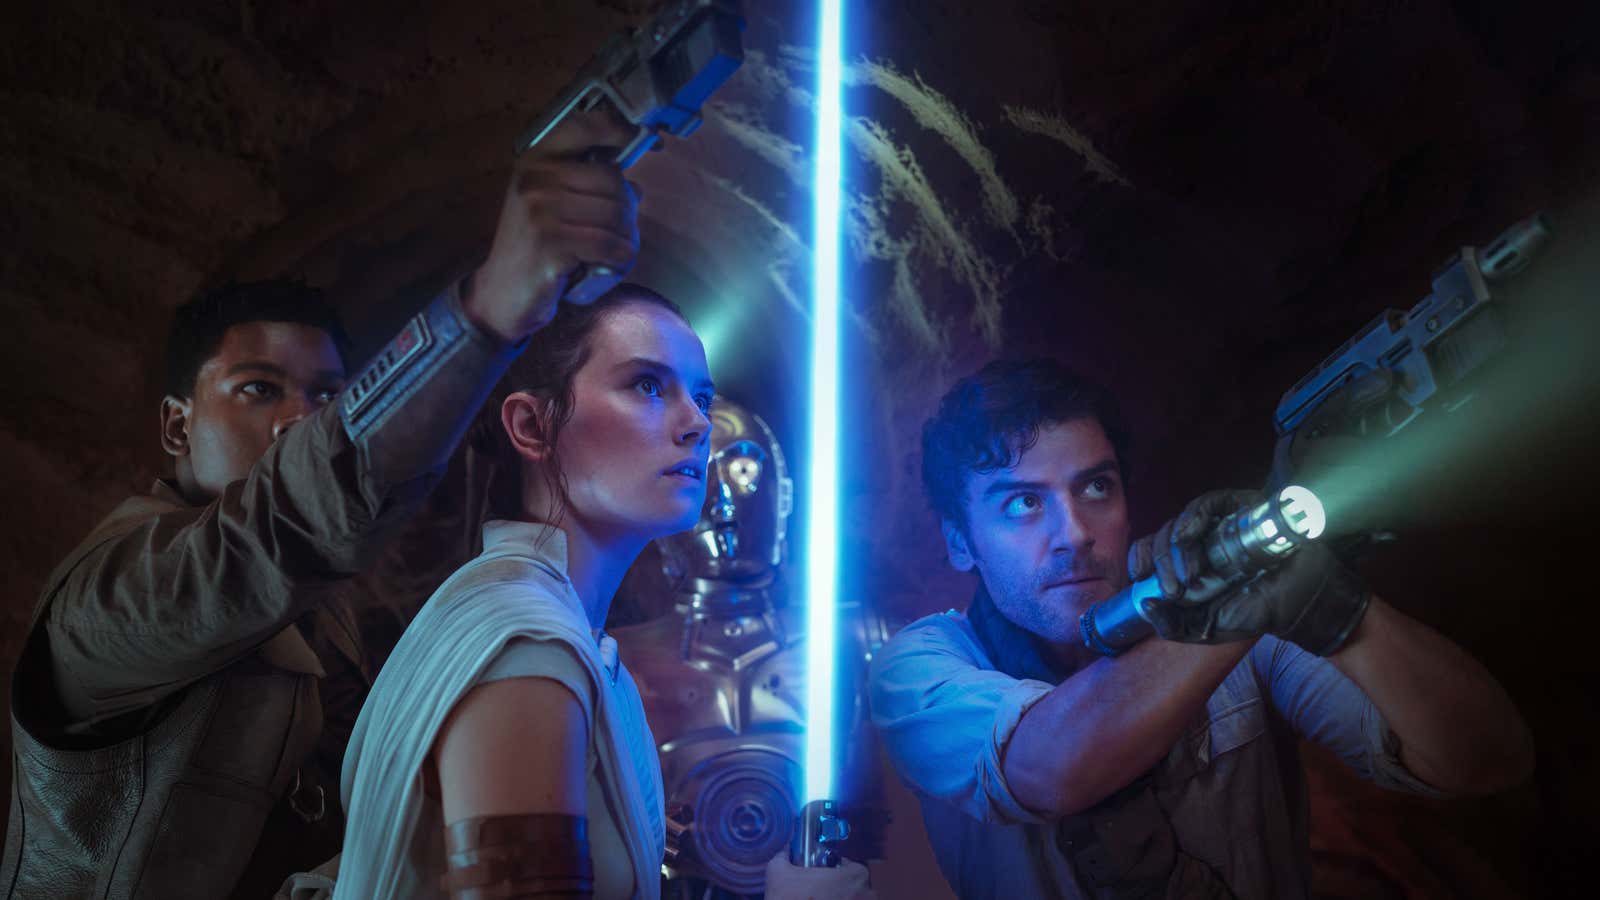 What We Know About 'Star Wars: The Rise of Skywalker' - The New